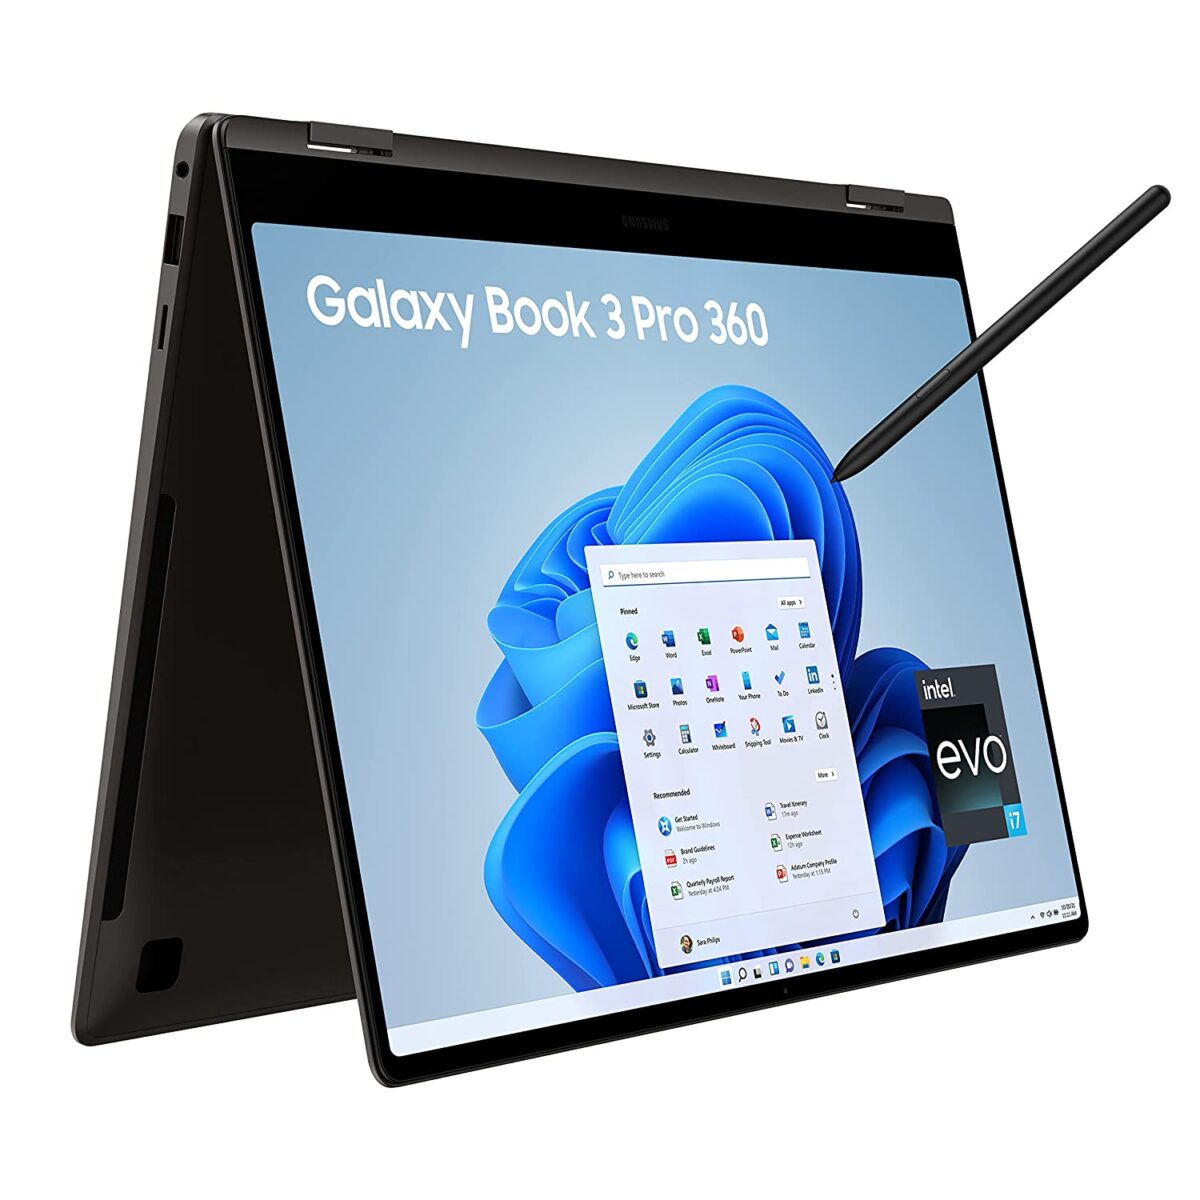 Samsung Galaxy Book 3 series Laptops up for Pre-order on Amazon India [ 13th Gen Intel / AMOLED screen / WiFi 6E / PCIe 4 SSD ]